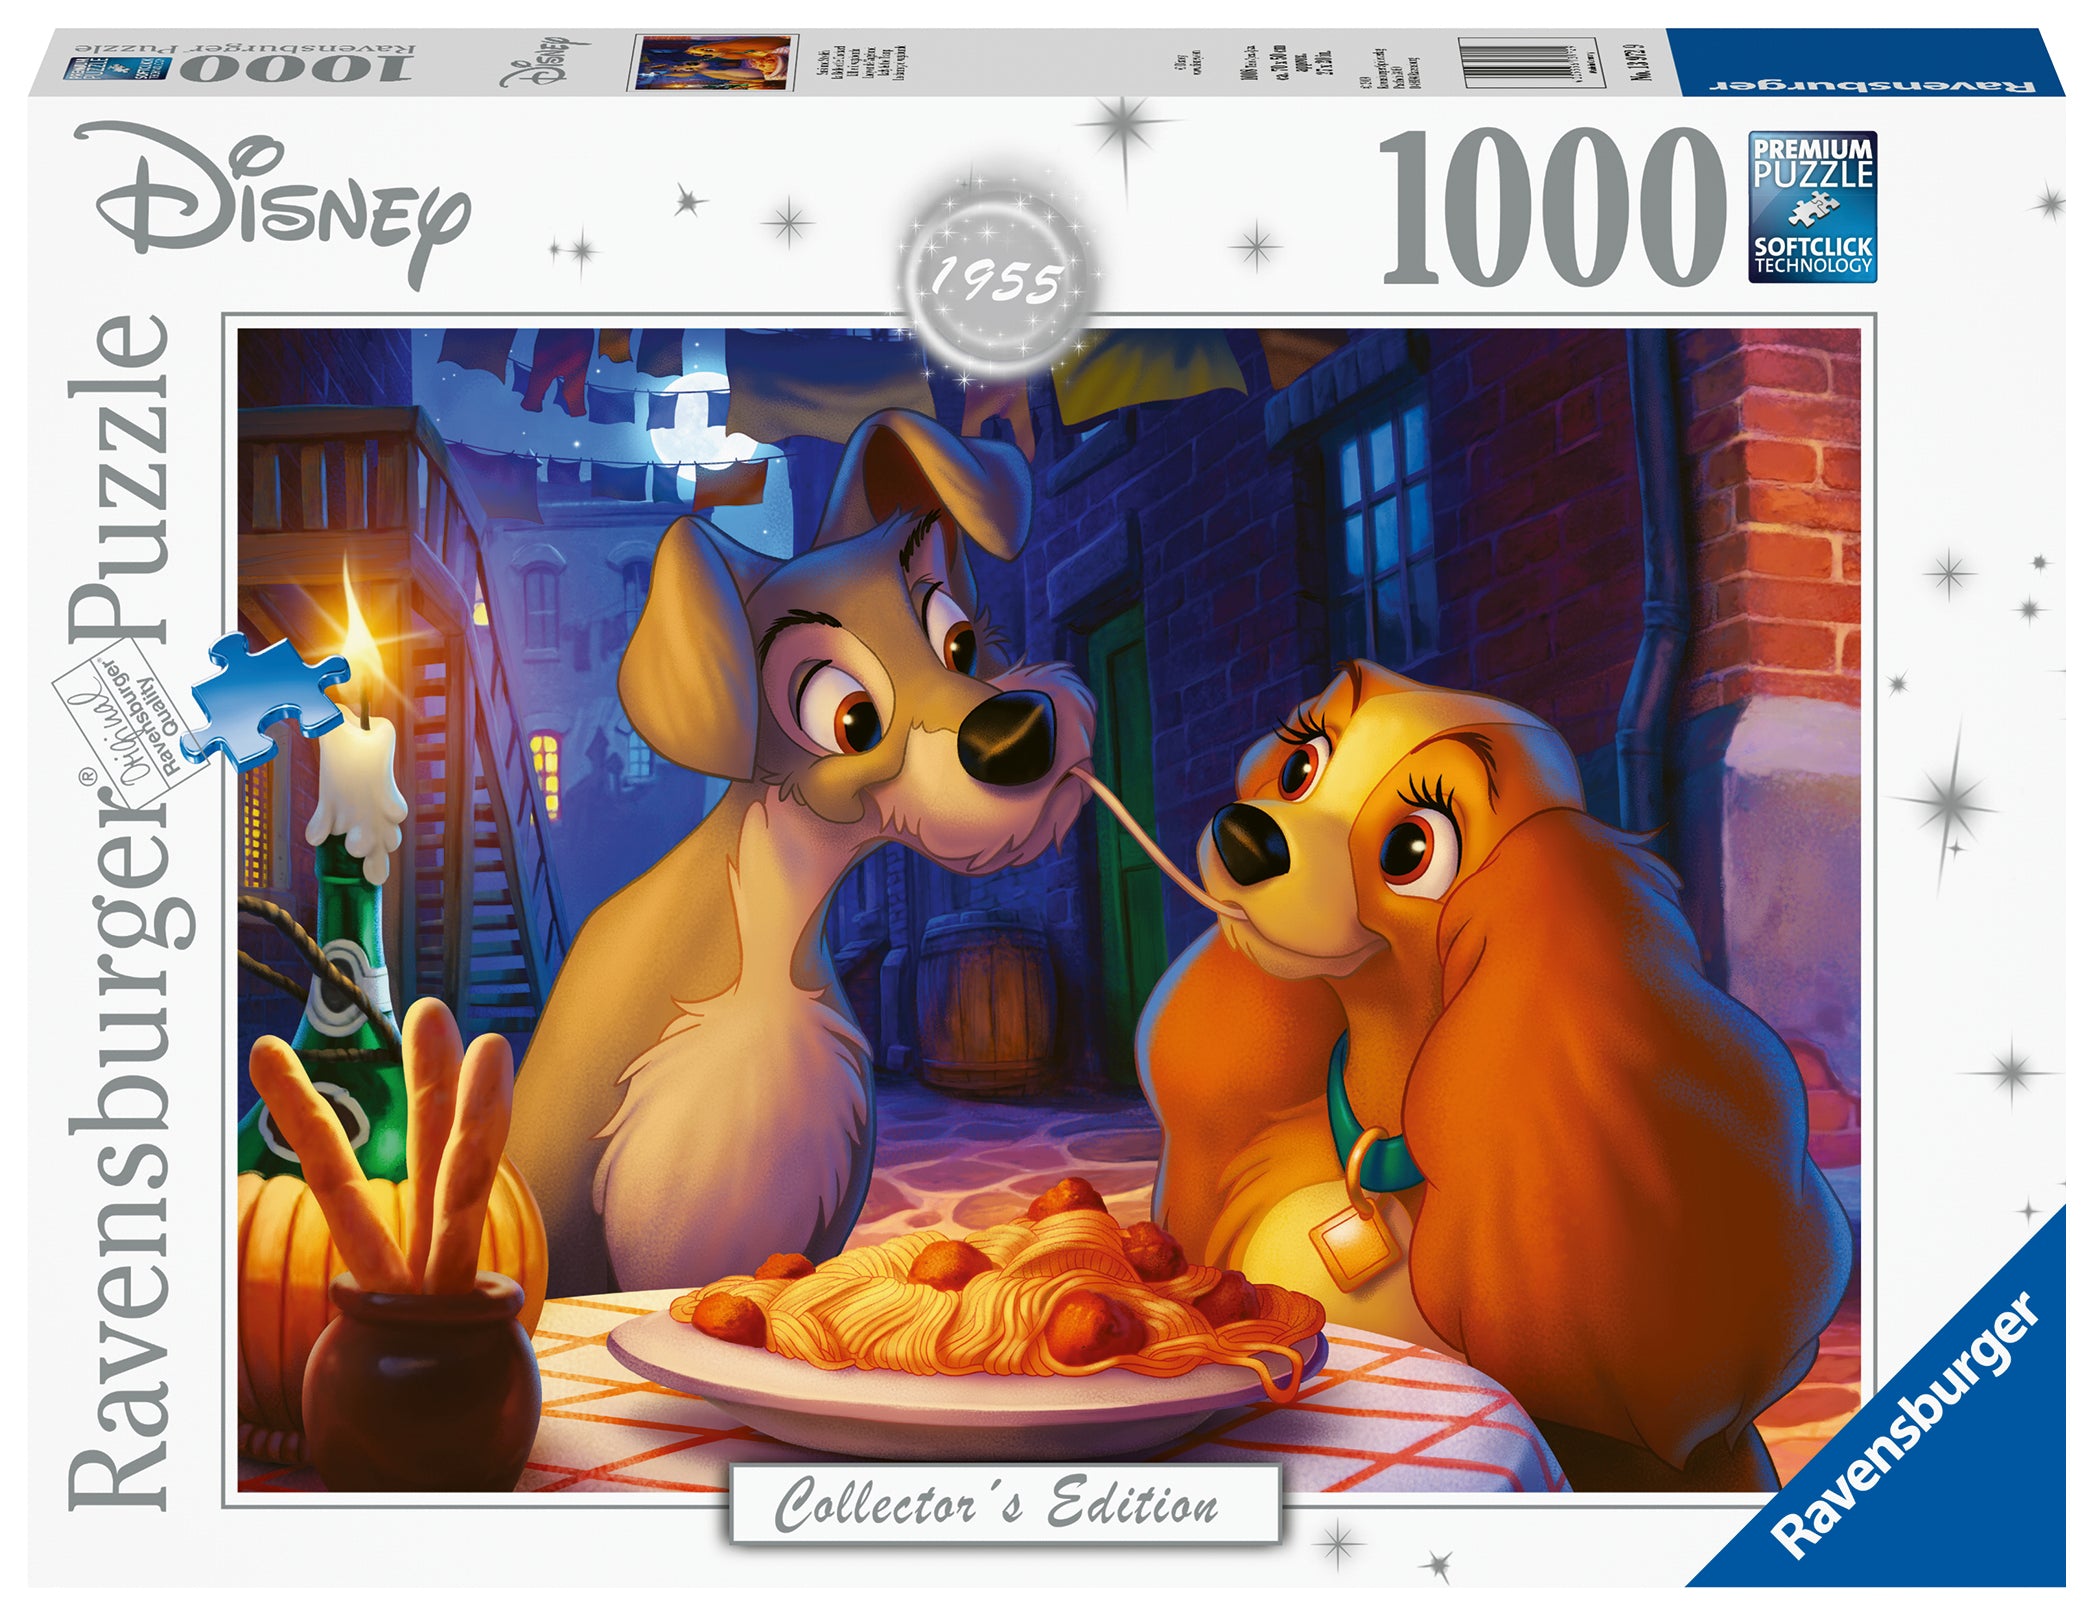 Lady and the Tramp 1000pc